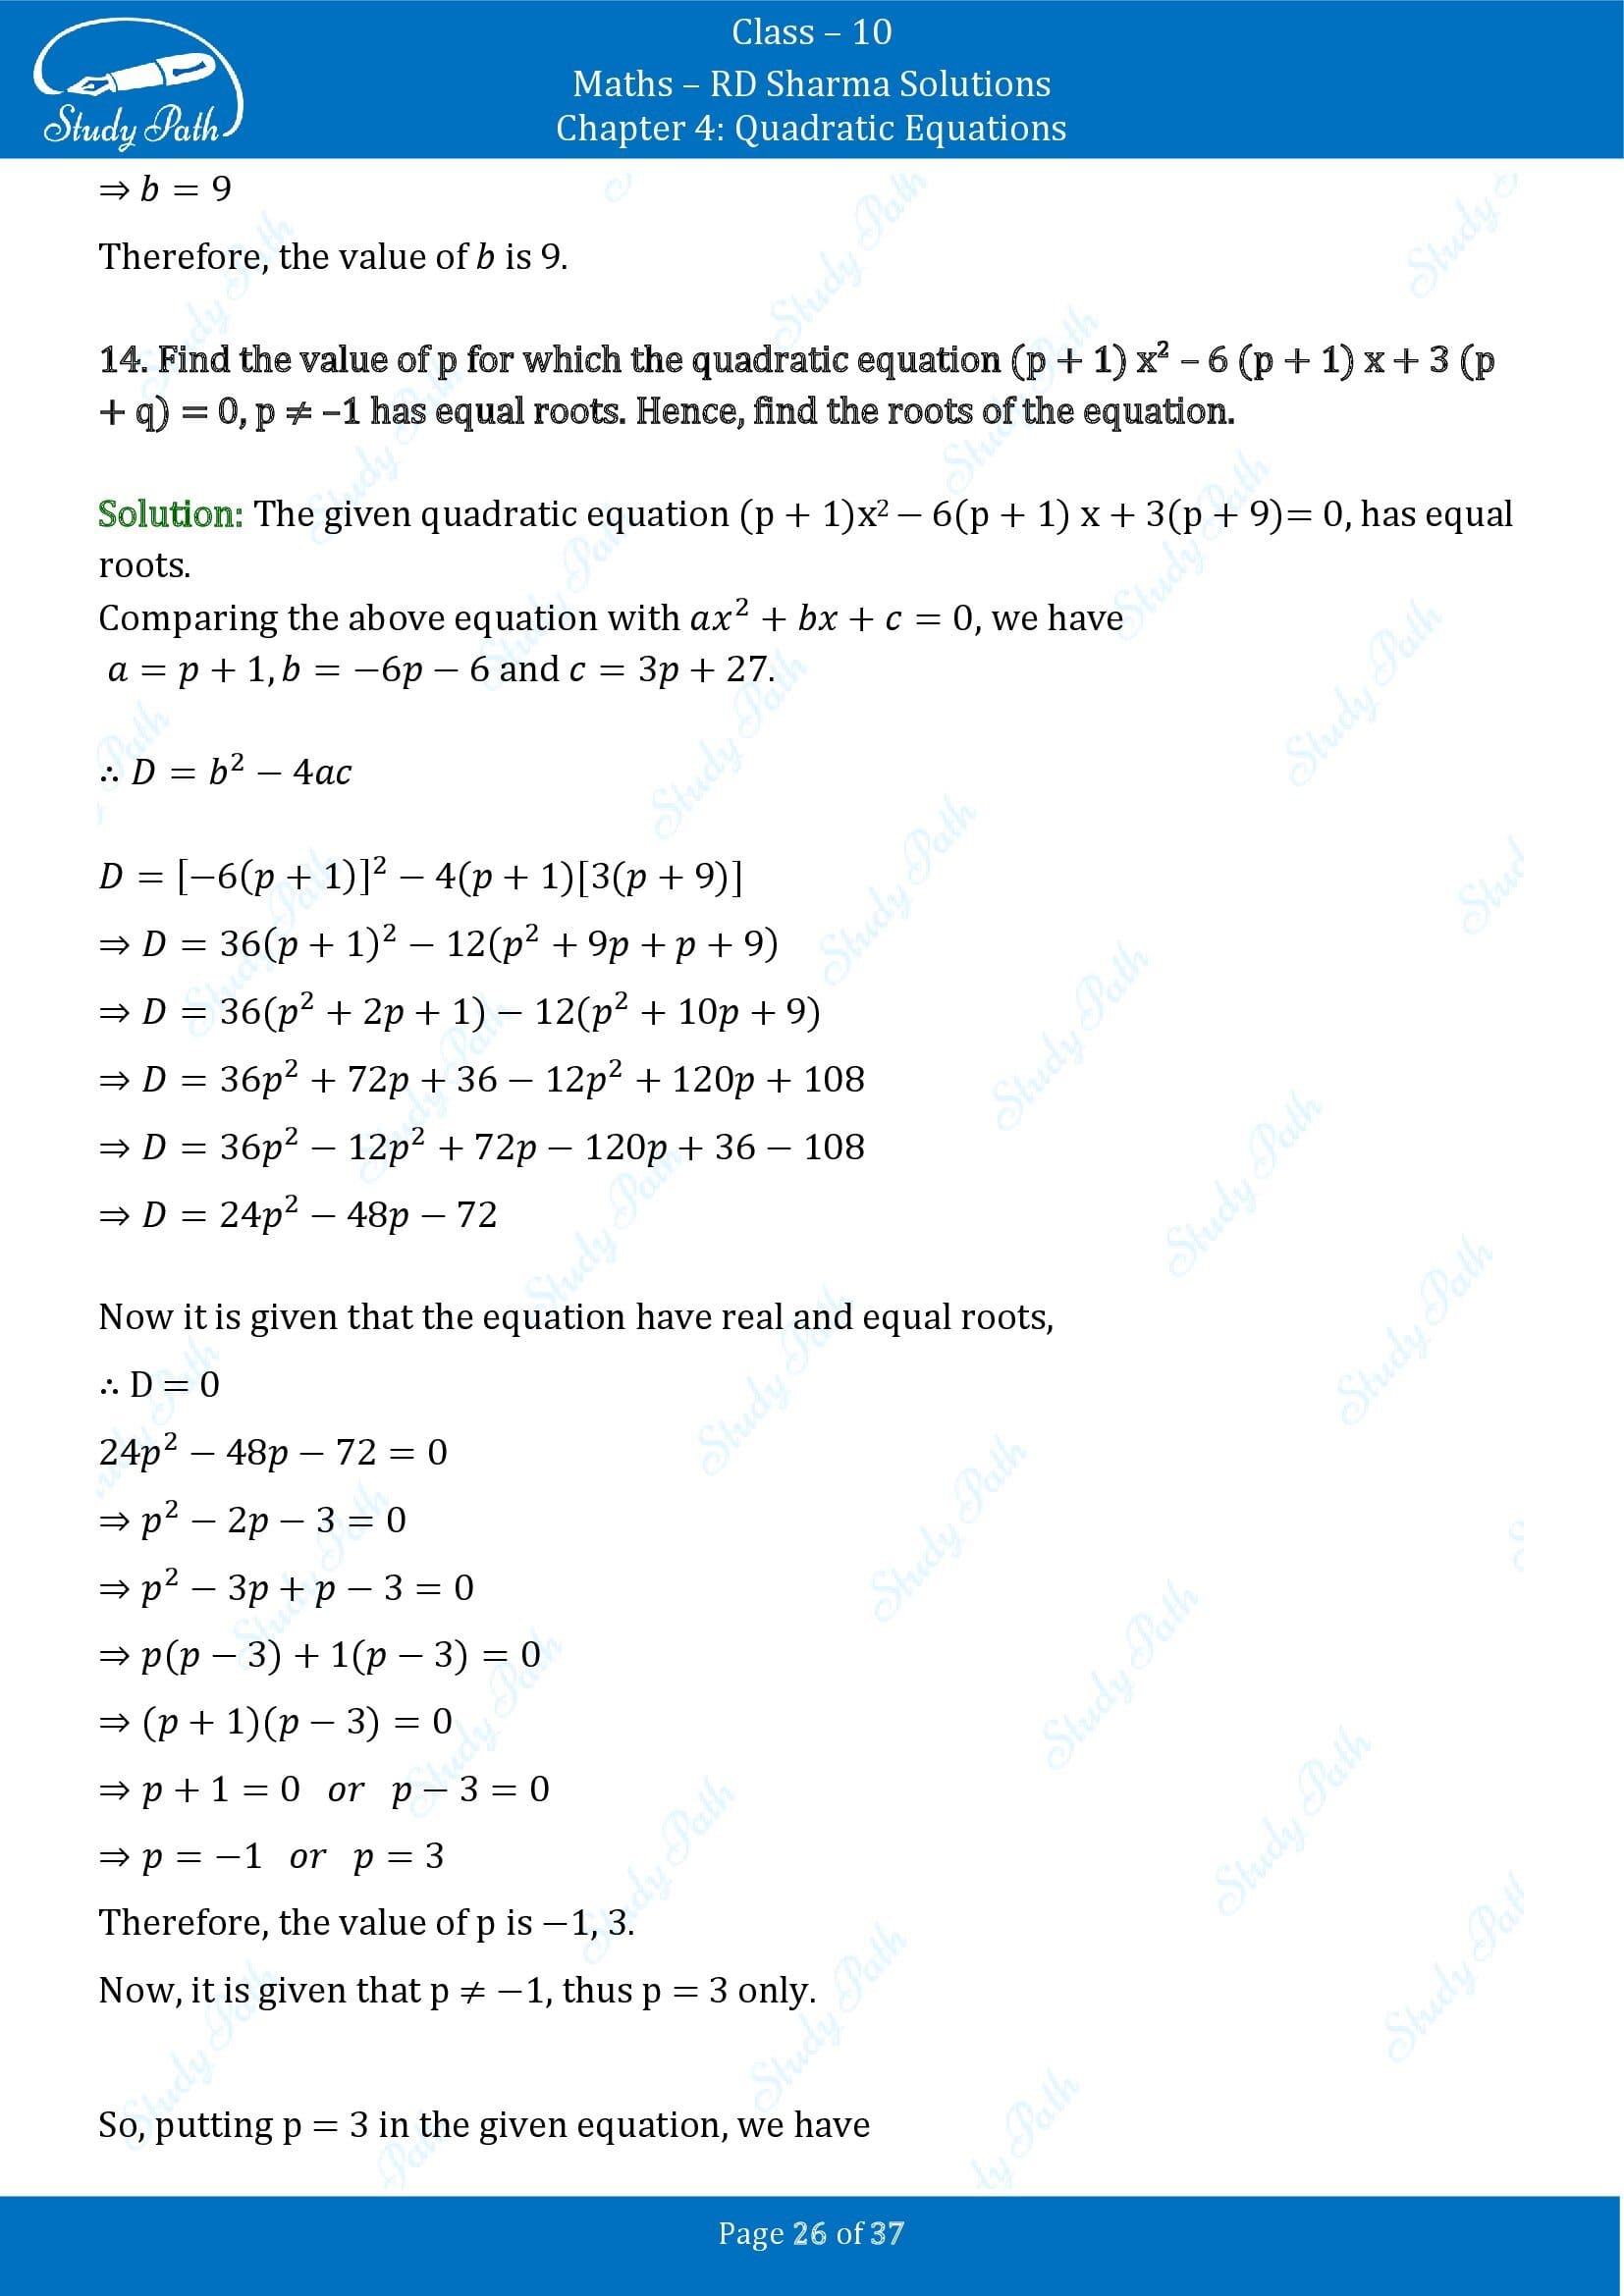 RD Sharma Solutions Class 10 Chapter 4 Quadratic Equations Exercise 4.6 00026